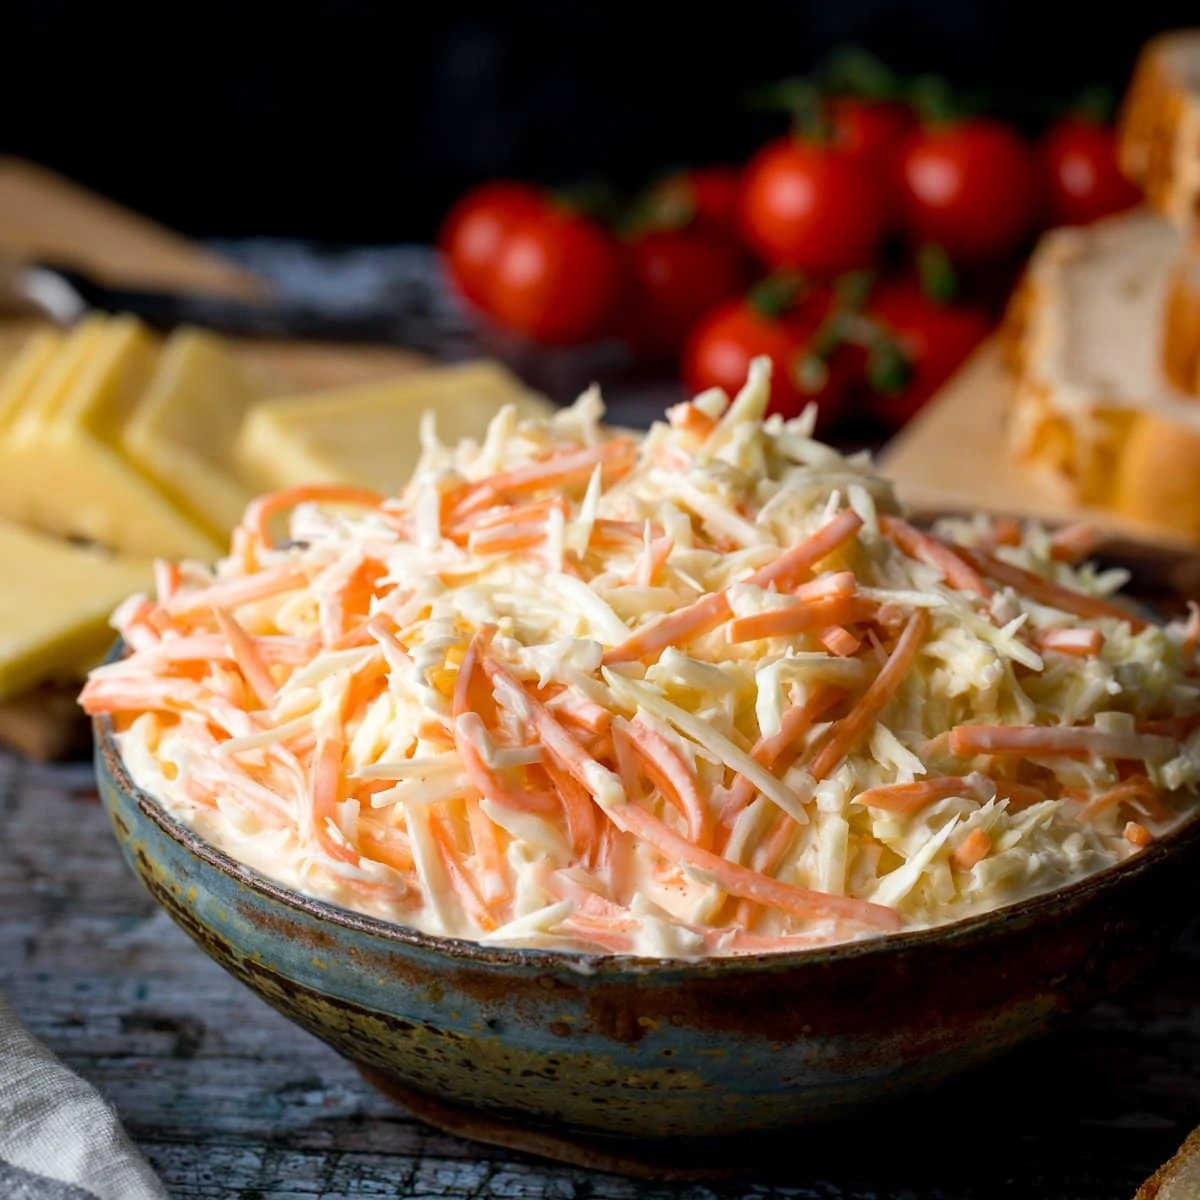 creamy coleslaw in a bowl. Cheese and cherry tomatoes in the background